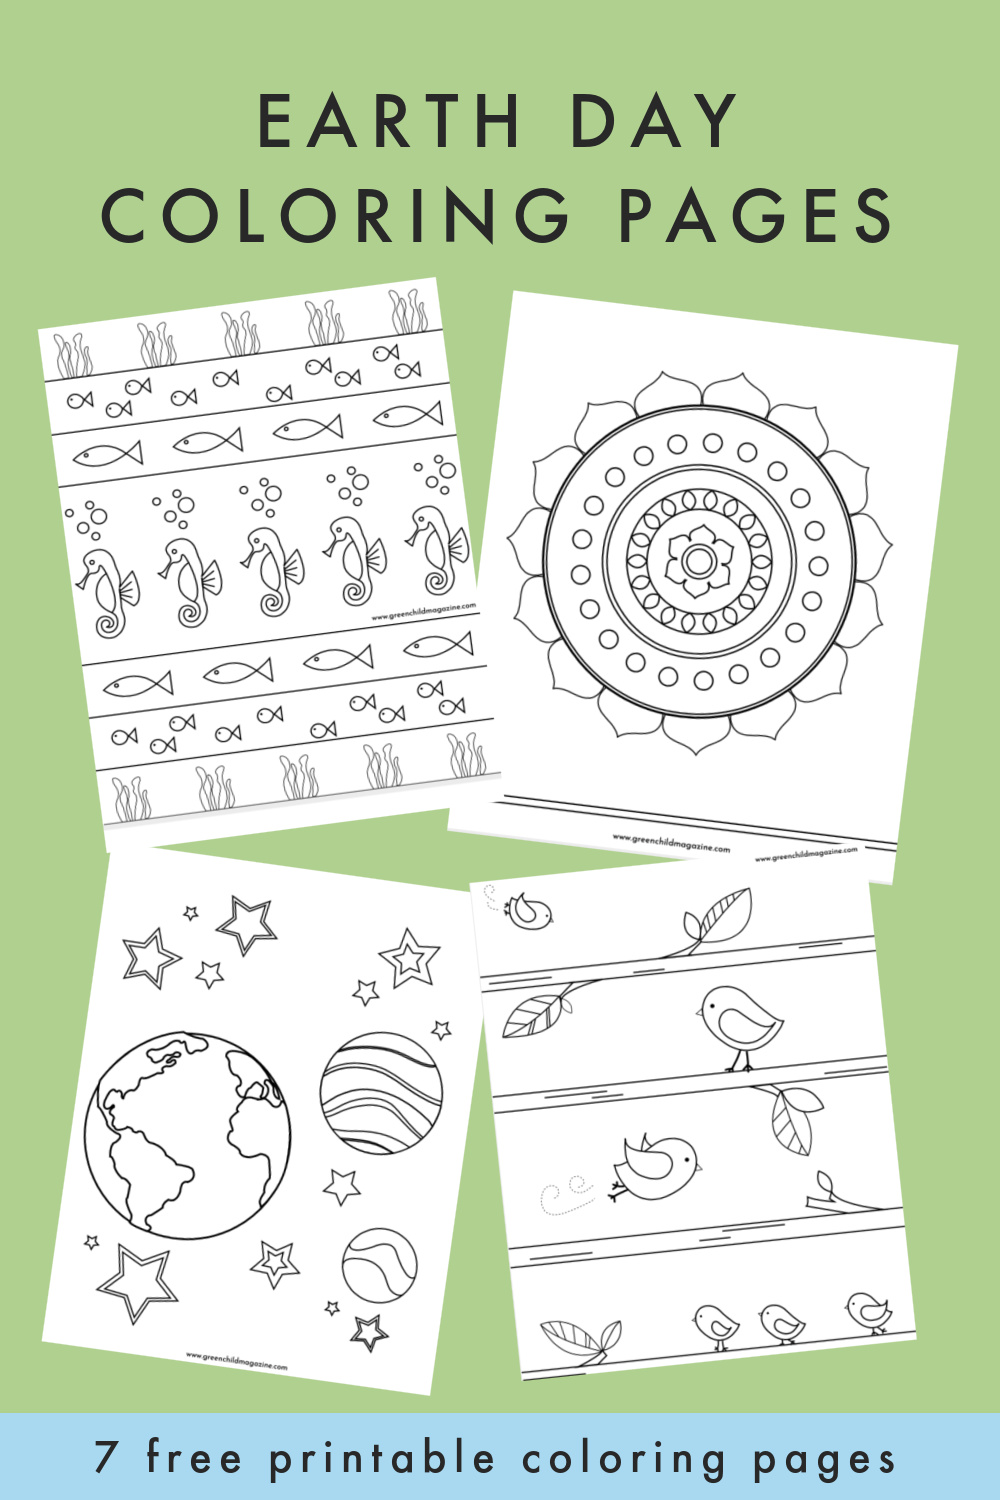 7 printable earth day coloring pages